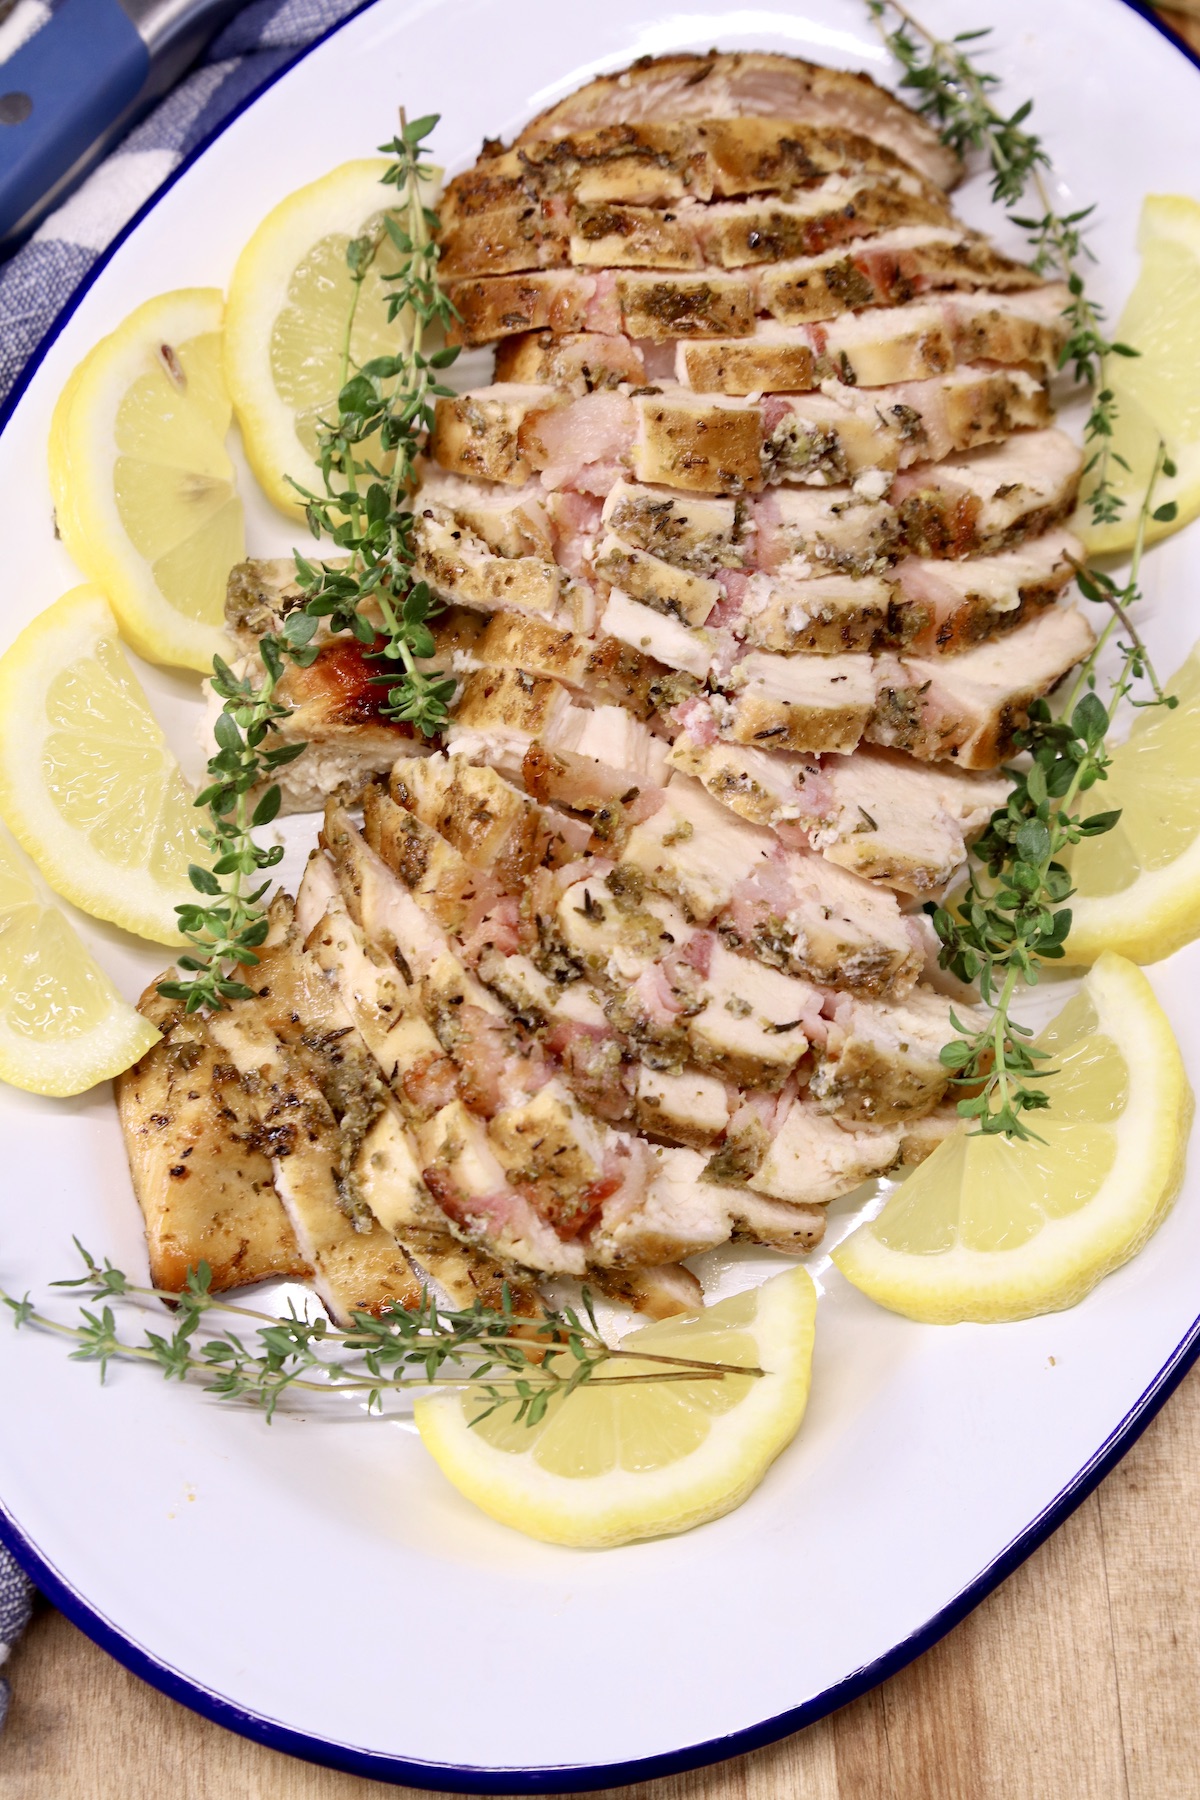 Platter of sliced chicken with lemon and thyme garnish